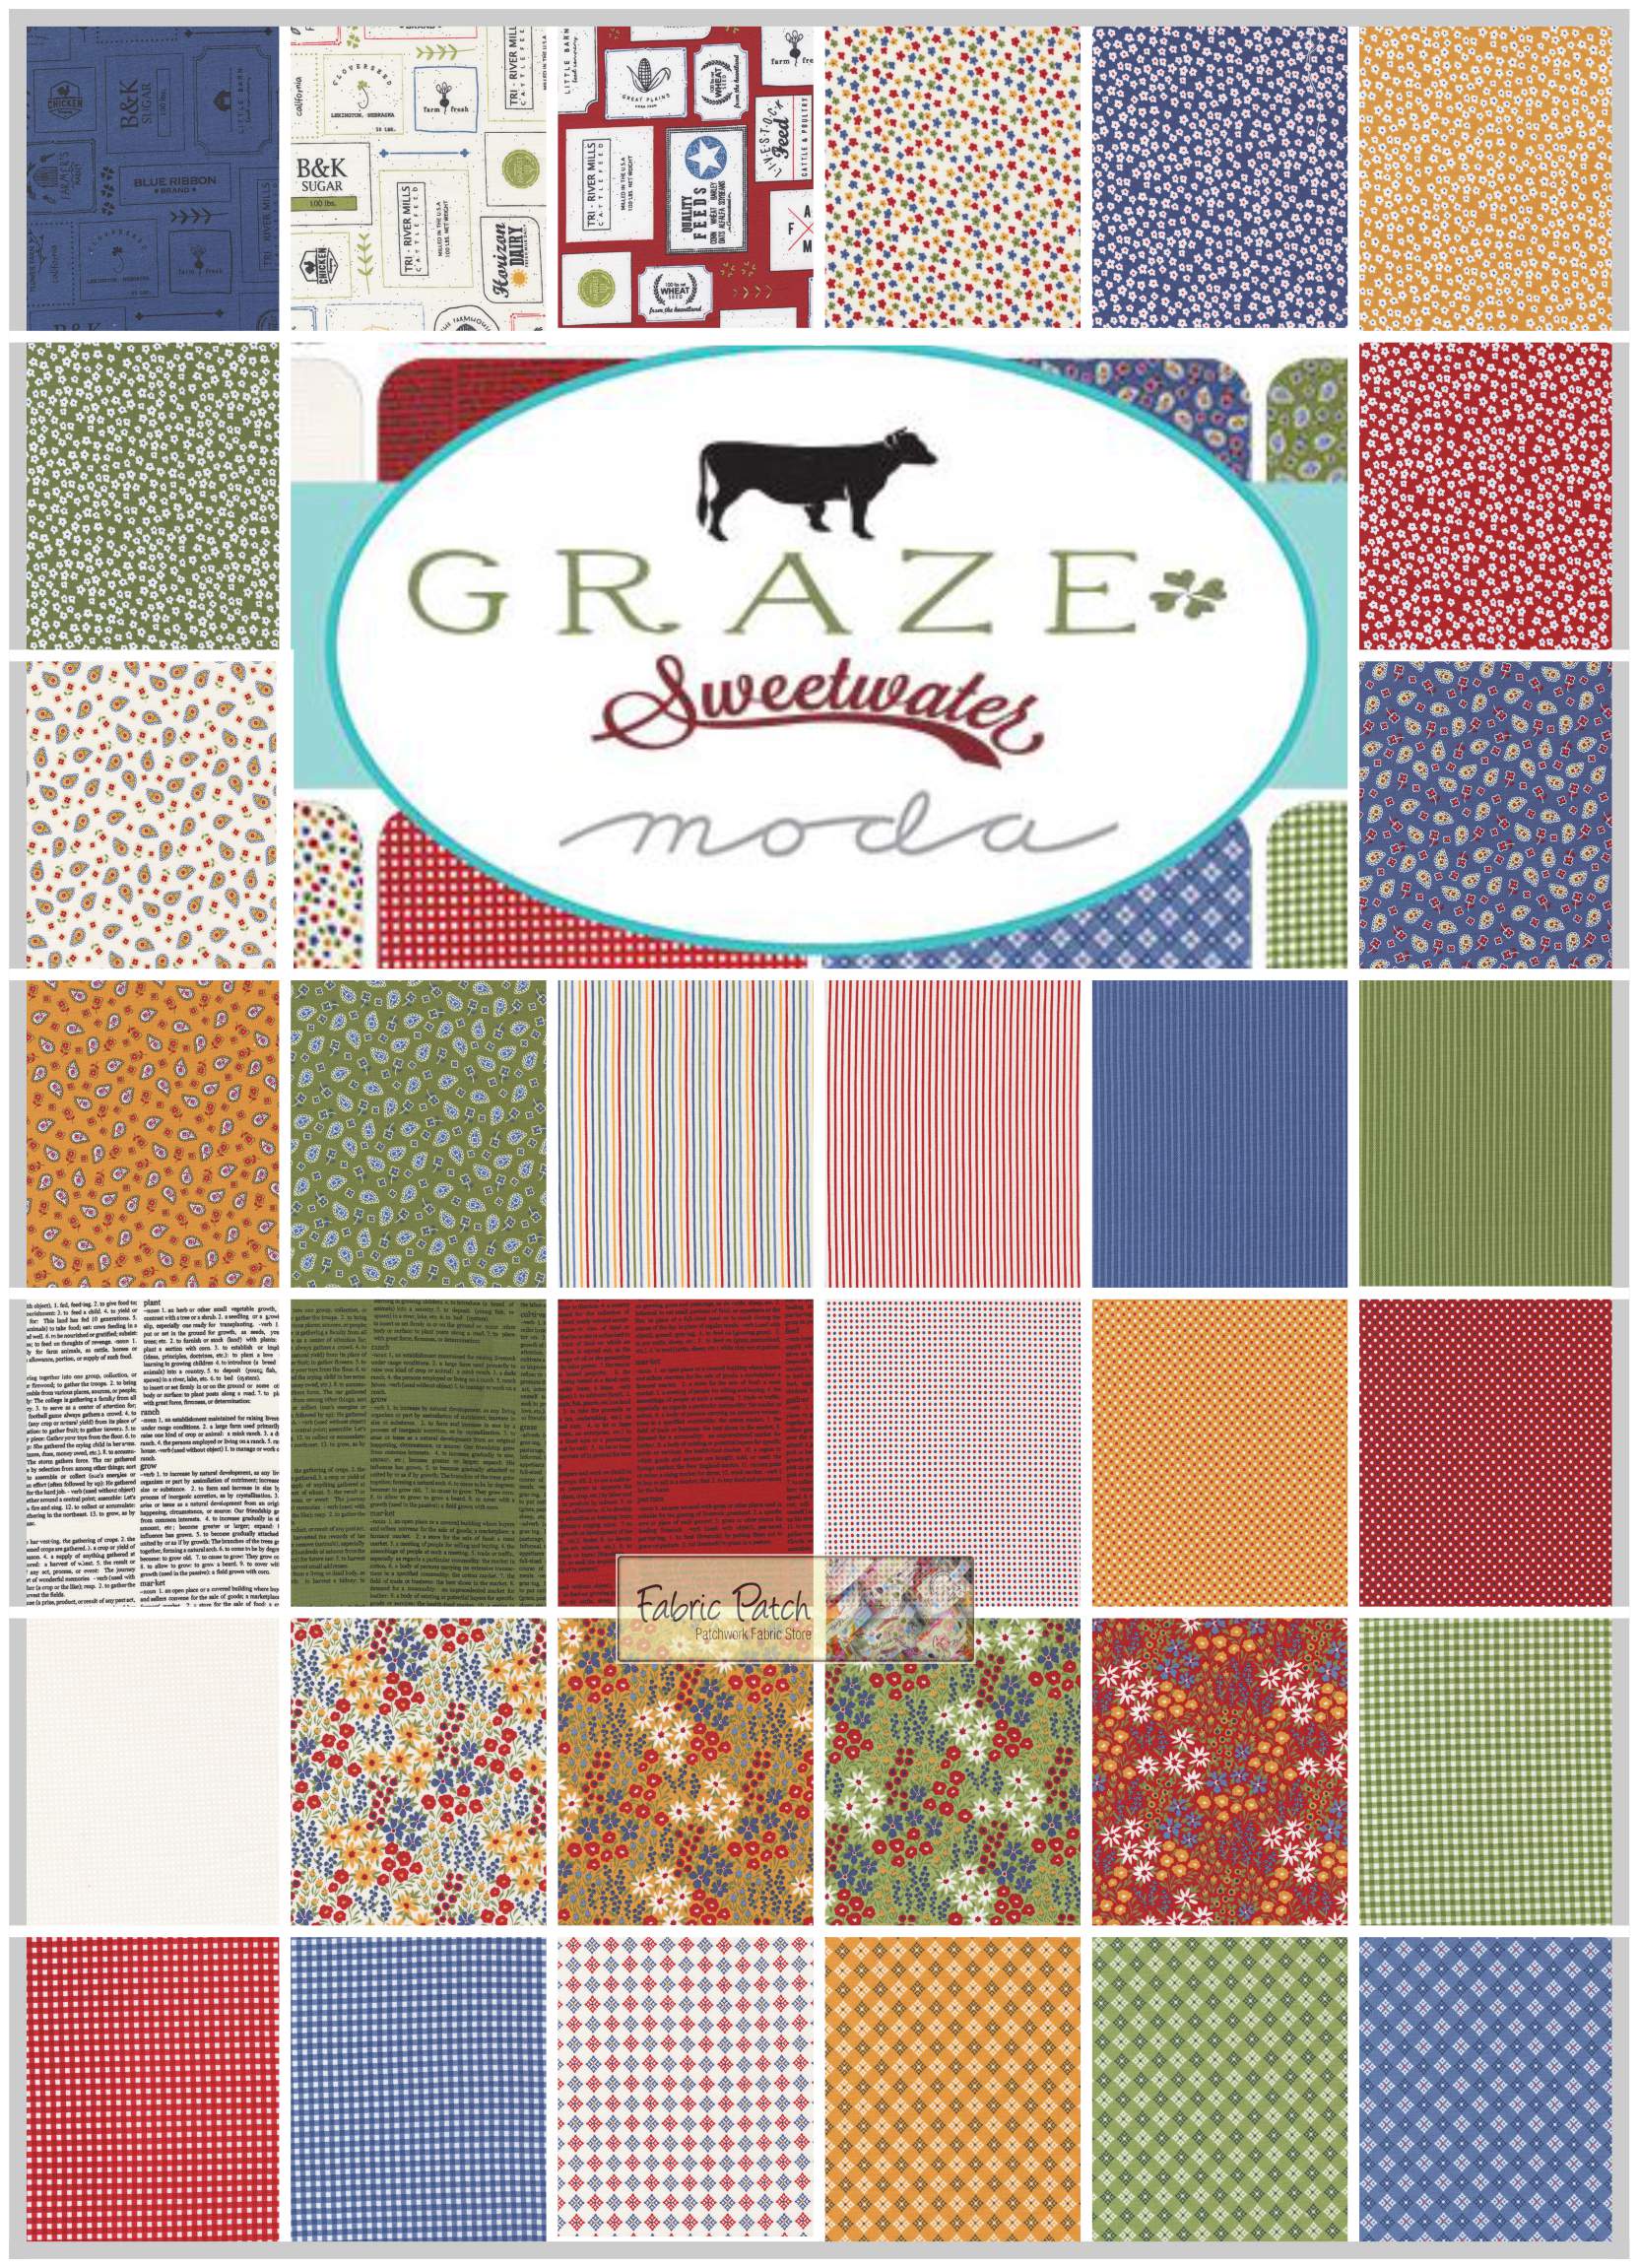 Graze Charm Square Applique, patchwork and quilting fabrics. Range by Sweetwater for Moda Fabrics.